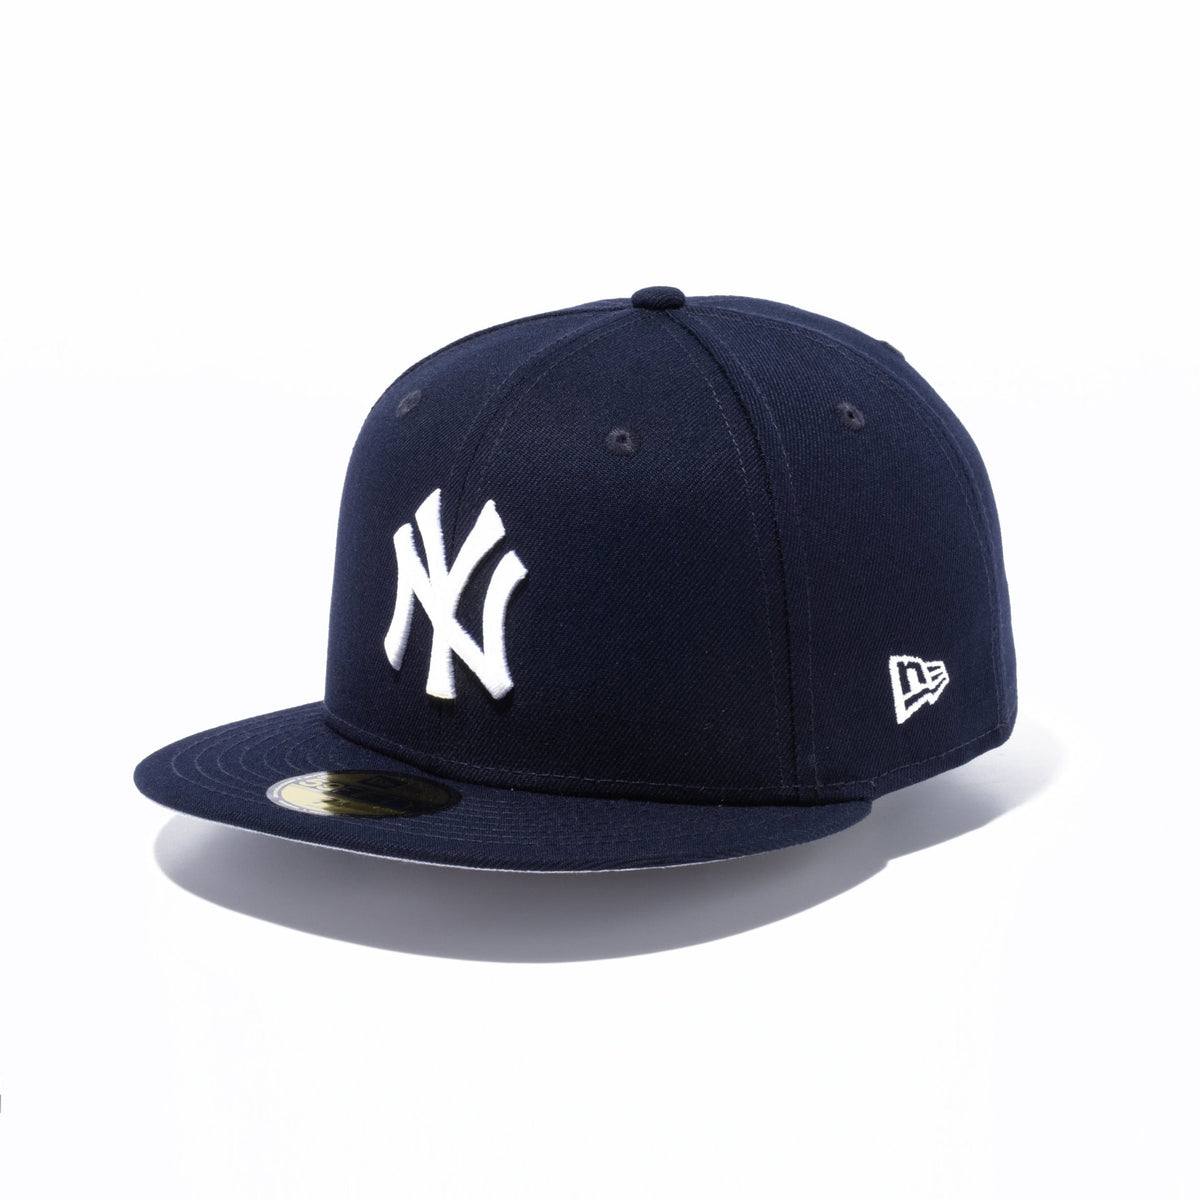 59FIFTY AC Collection ニューヨーク・ヤンキース グレーアンダー 